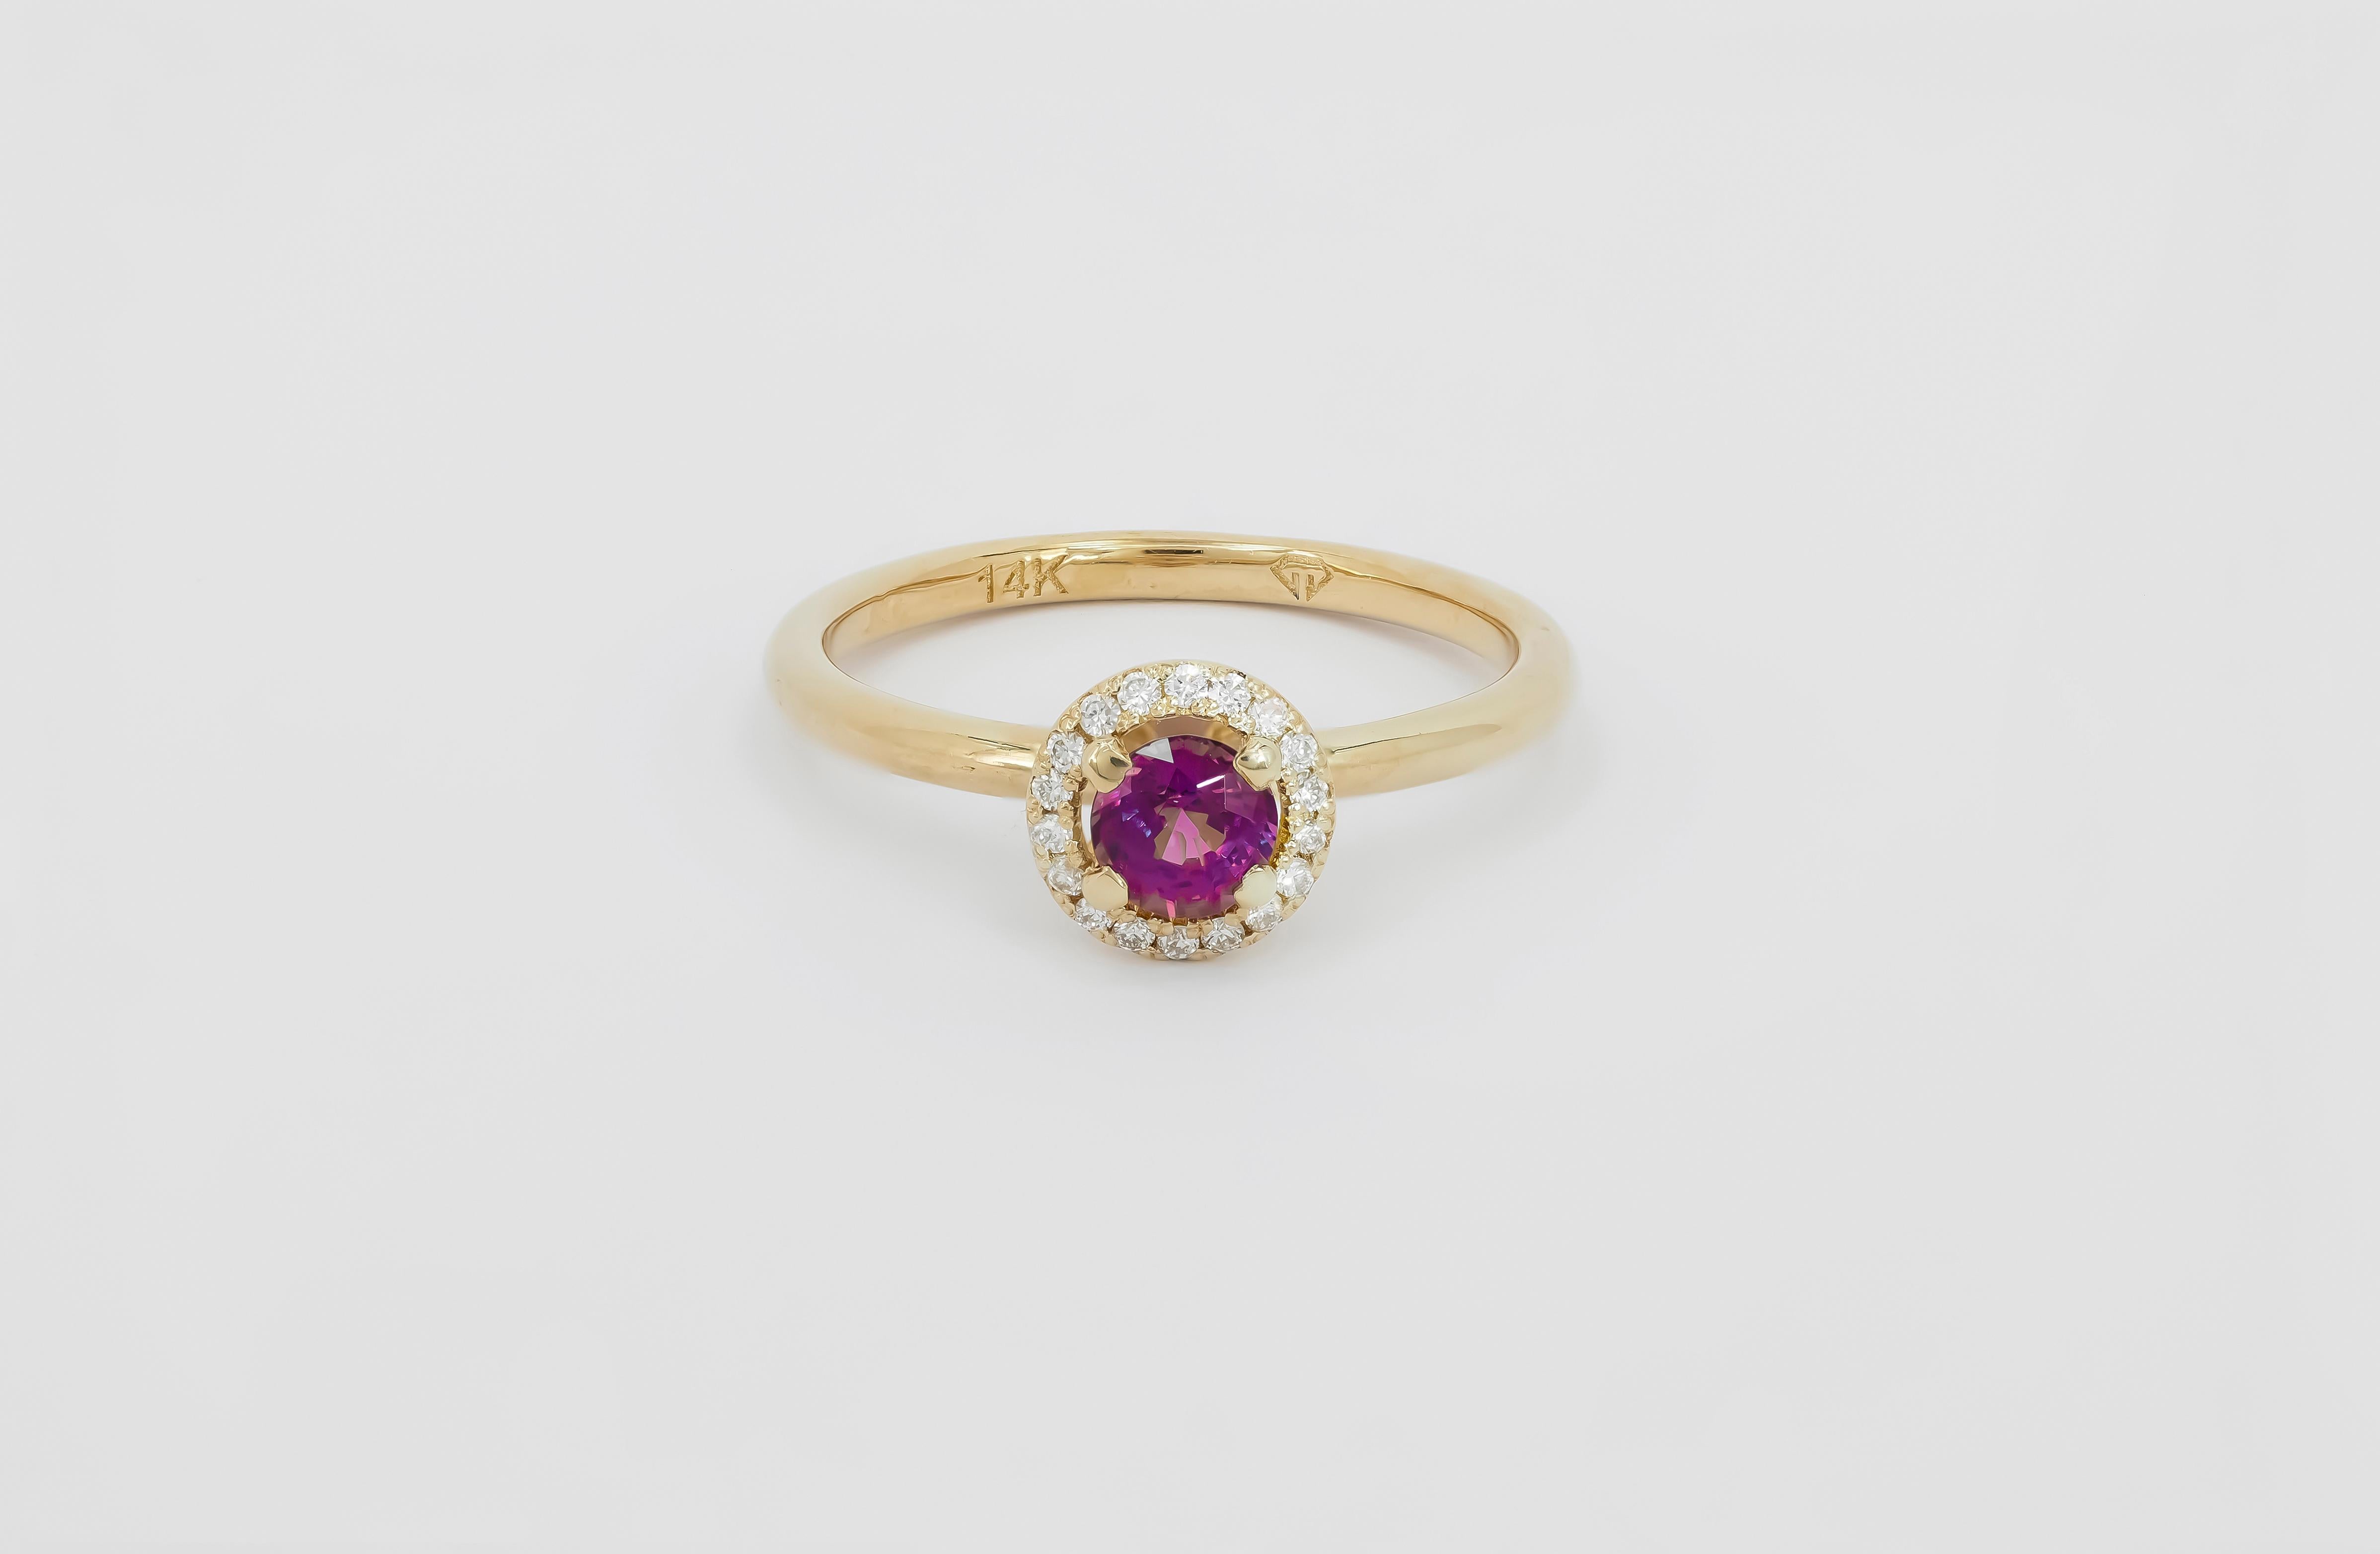 For Sale:  14k Solid Gold Ring with Natural Spinel and Diamonds 11